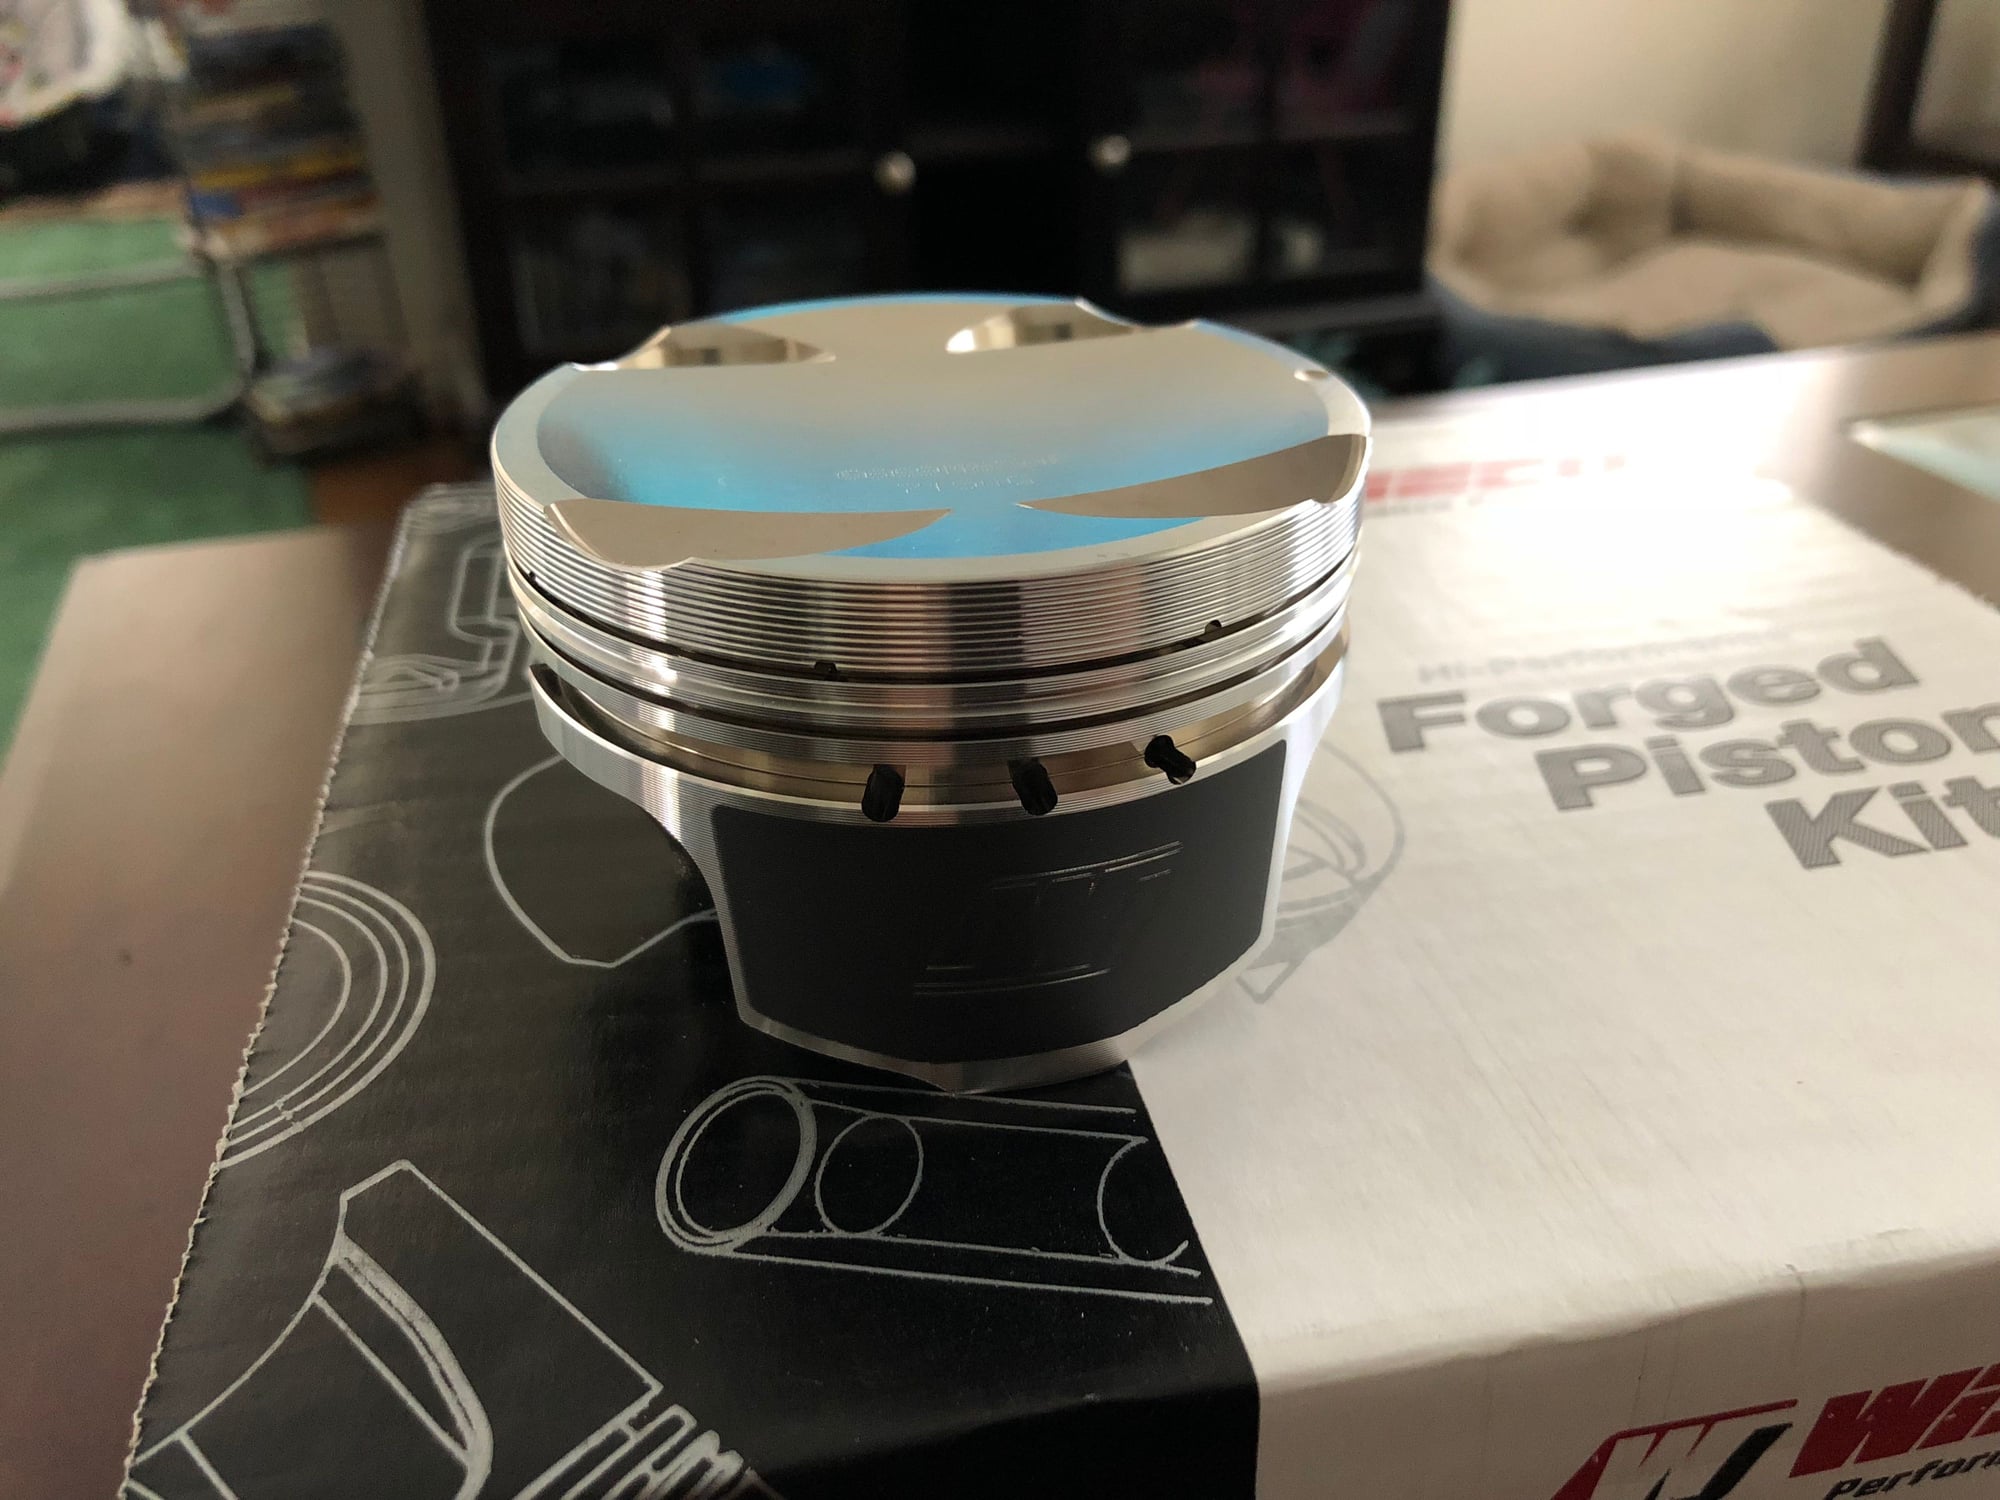 Engine - Power Adders - Evo 8/9 Wiseco HD2 10.5:1 Stroker Pistons - New - 2003 to 2006 Mitsubishi Lancer Evolution - Victorville, CA 92394, United States